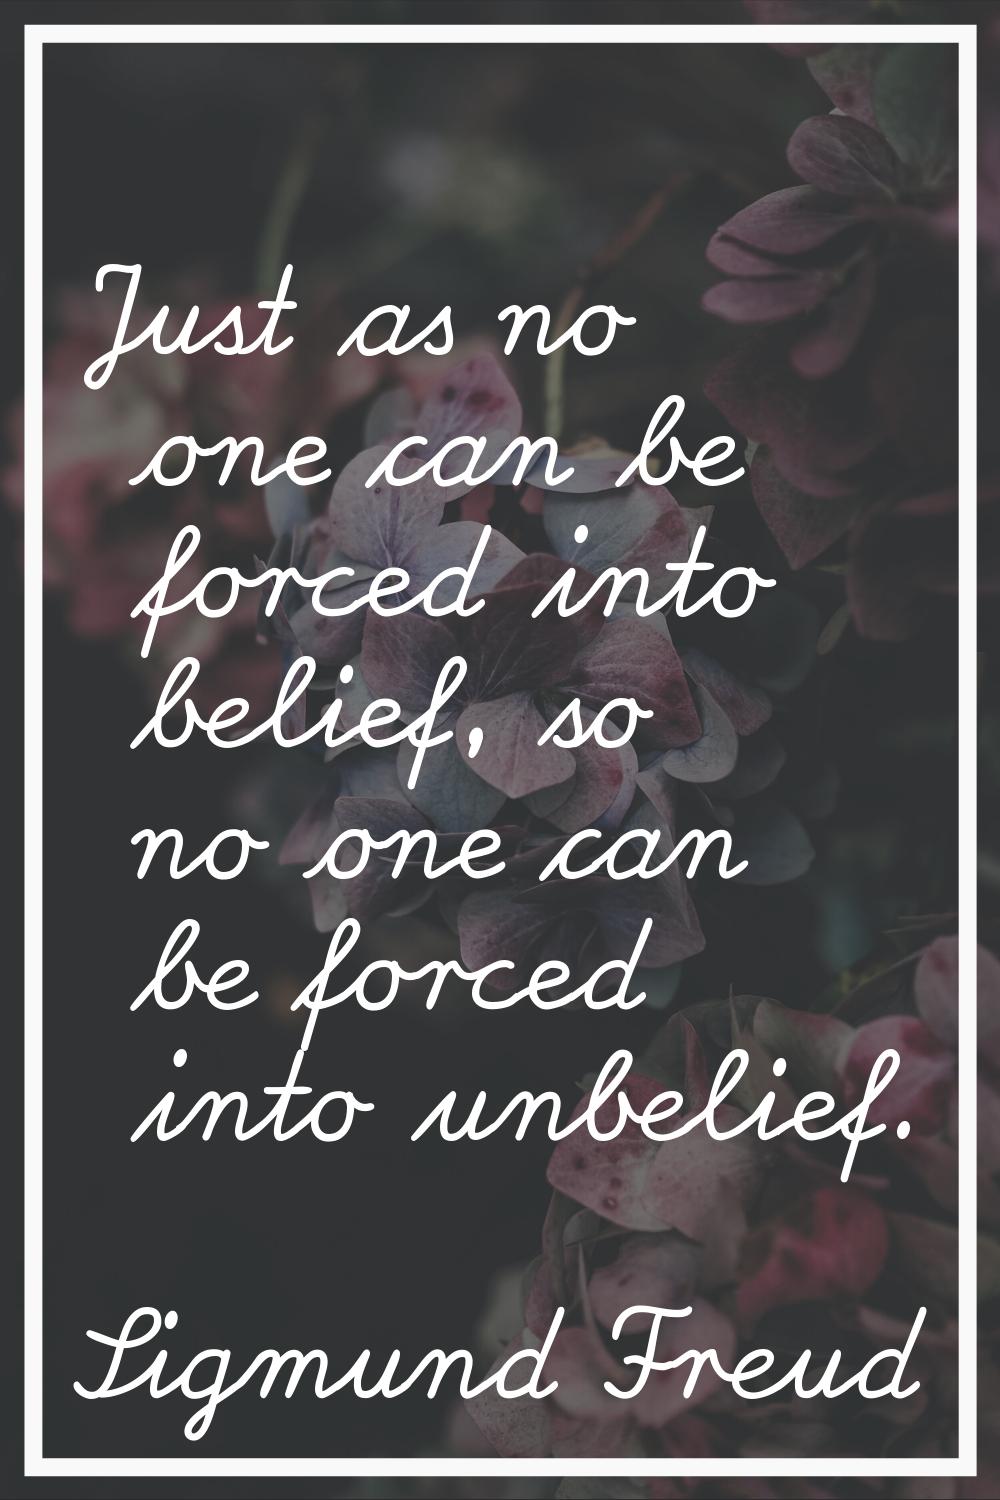 Just as no one can be forced into belief, so no one can be forced into unbelief.